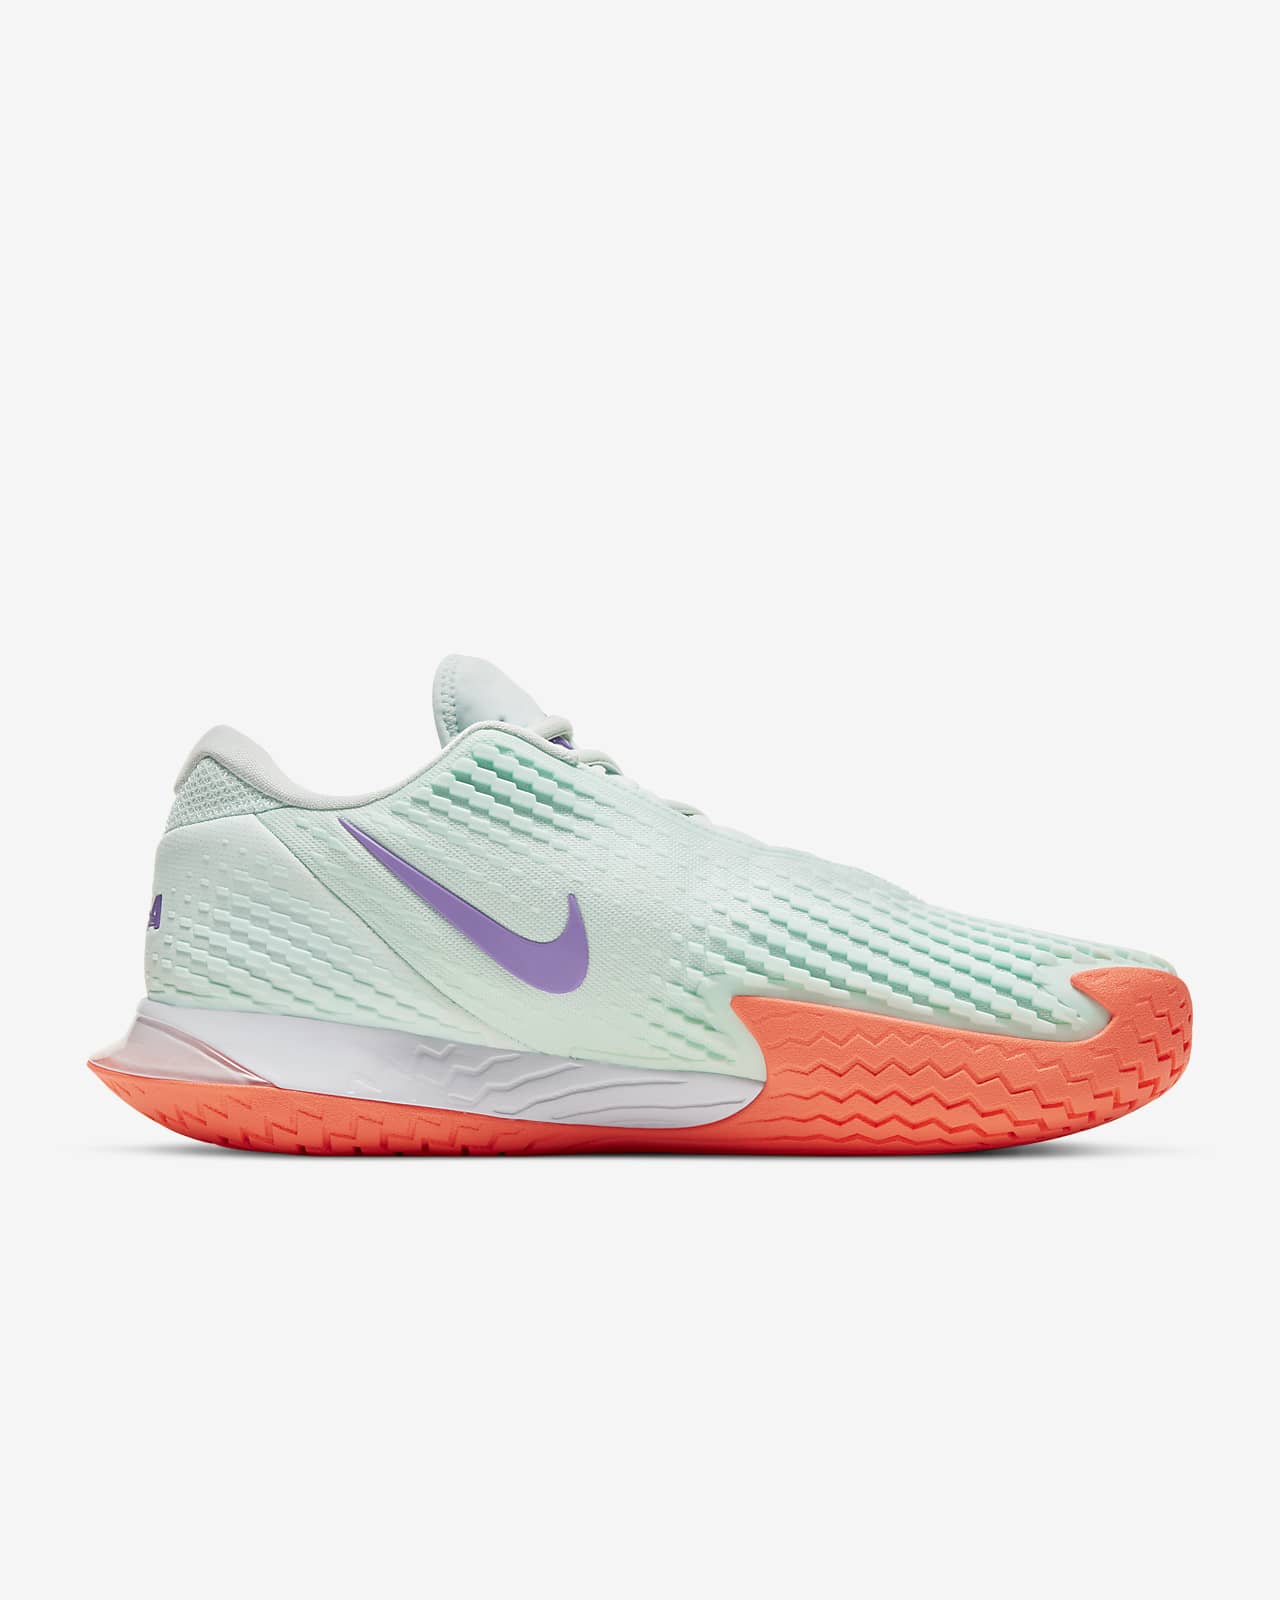 nike cage 4 tennis shoes